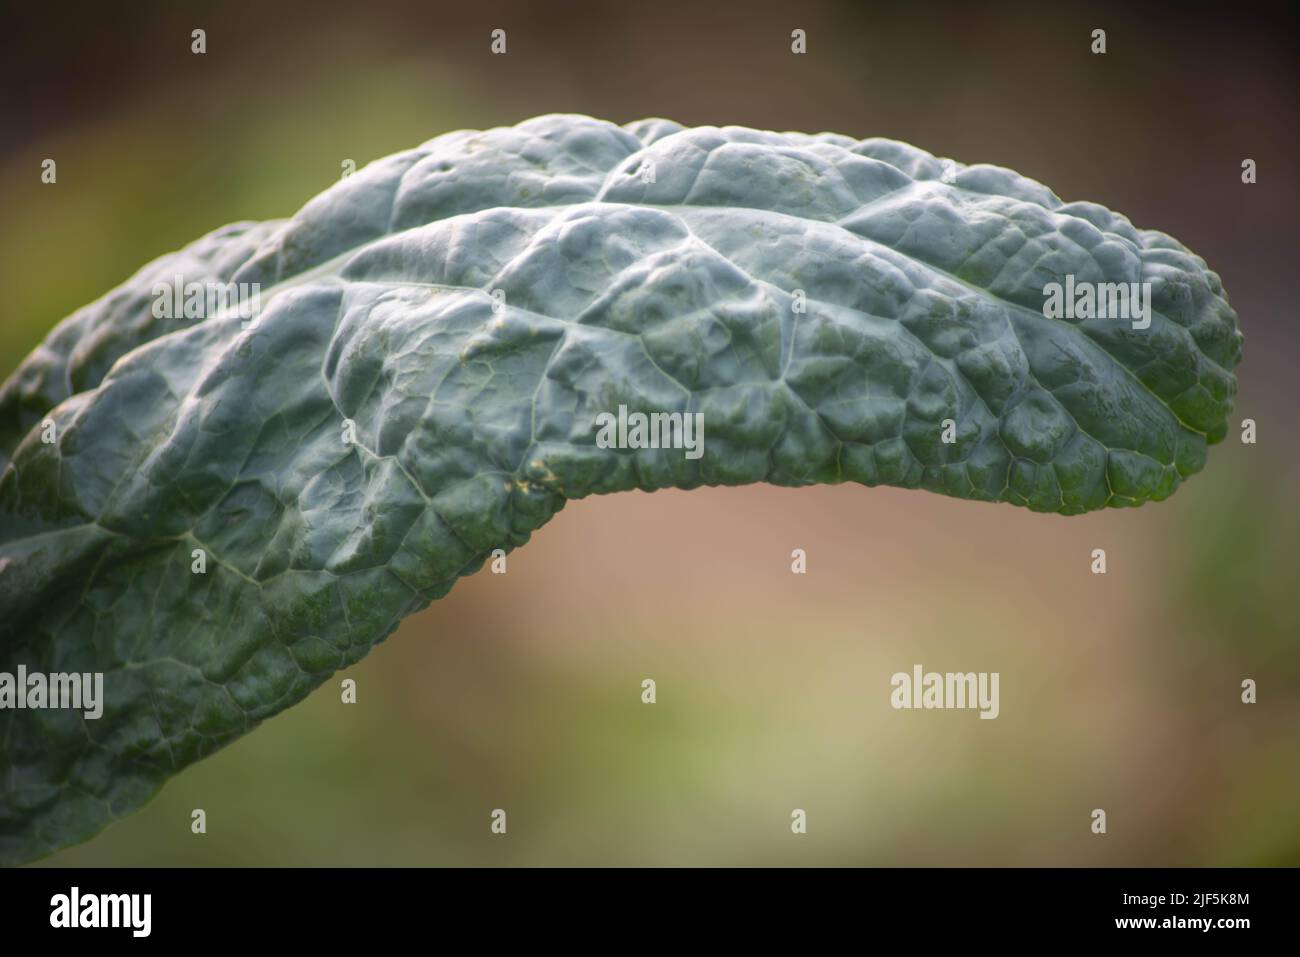 Abstract isolated kale leaf with texture and defocused background Stock Photo